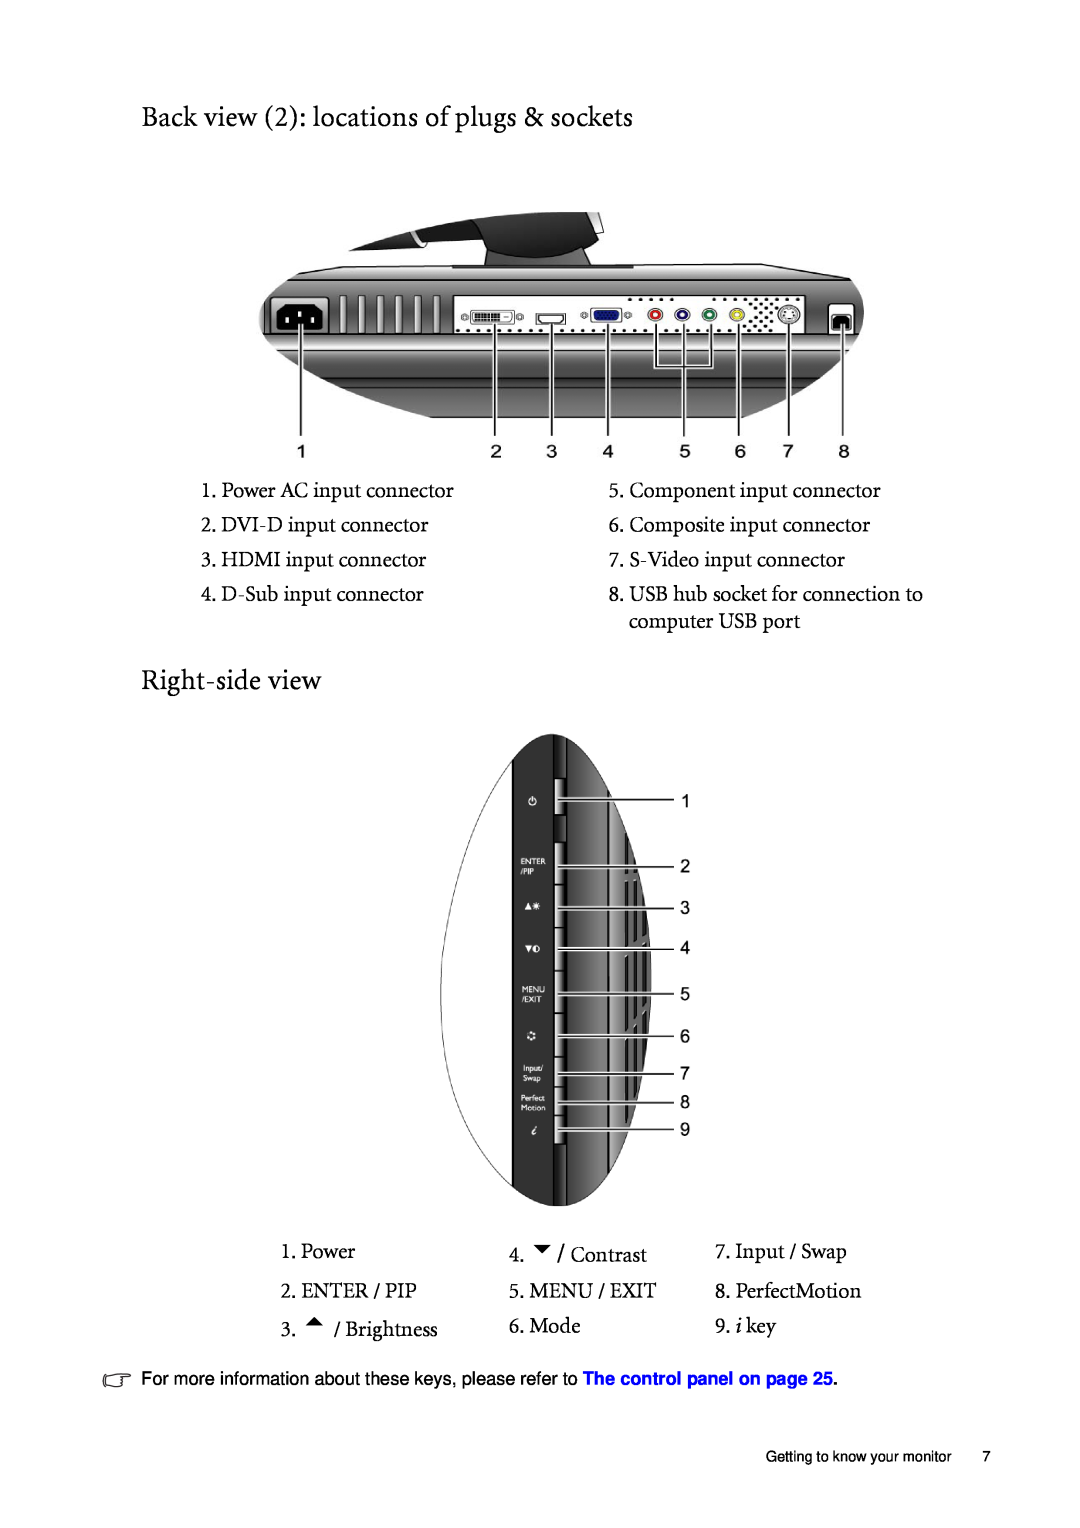 BenQ FP241WZ user manual Back view 2 locations of plugs & sockets, Right-side view 